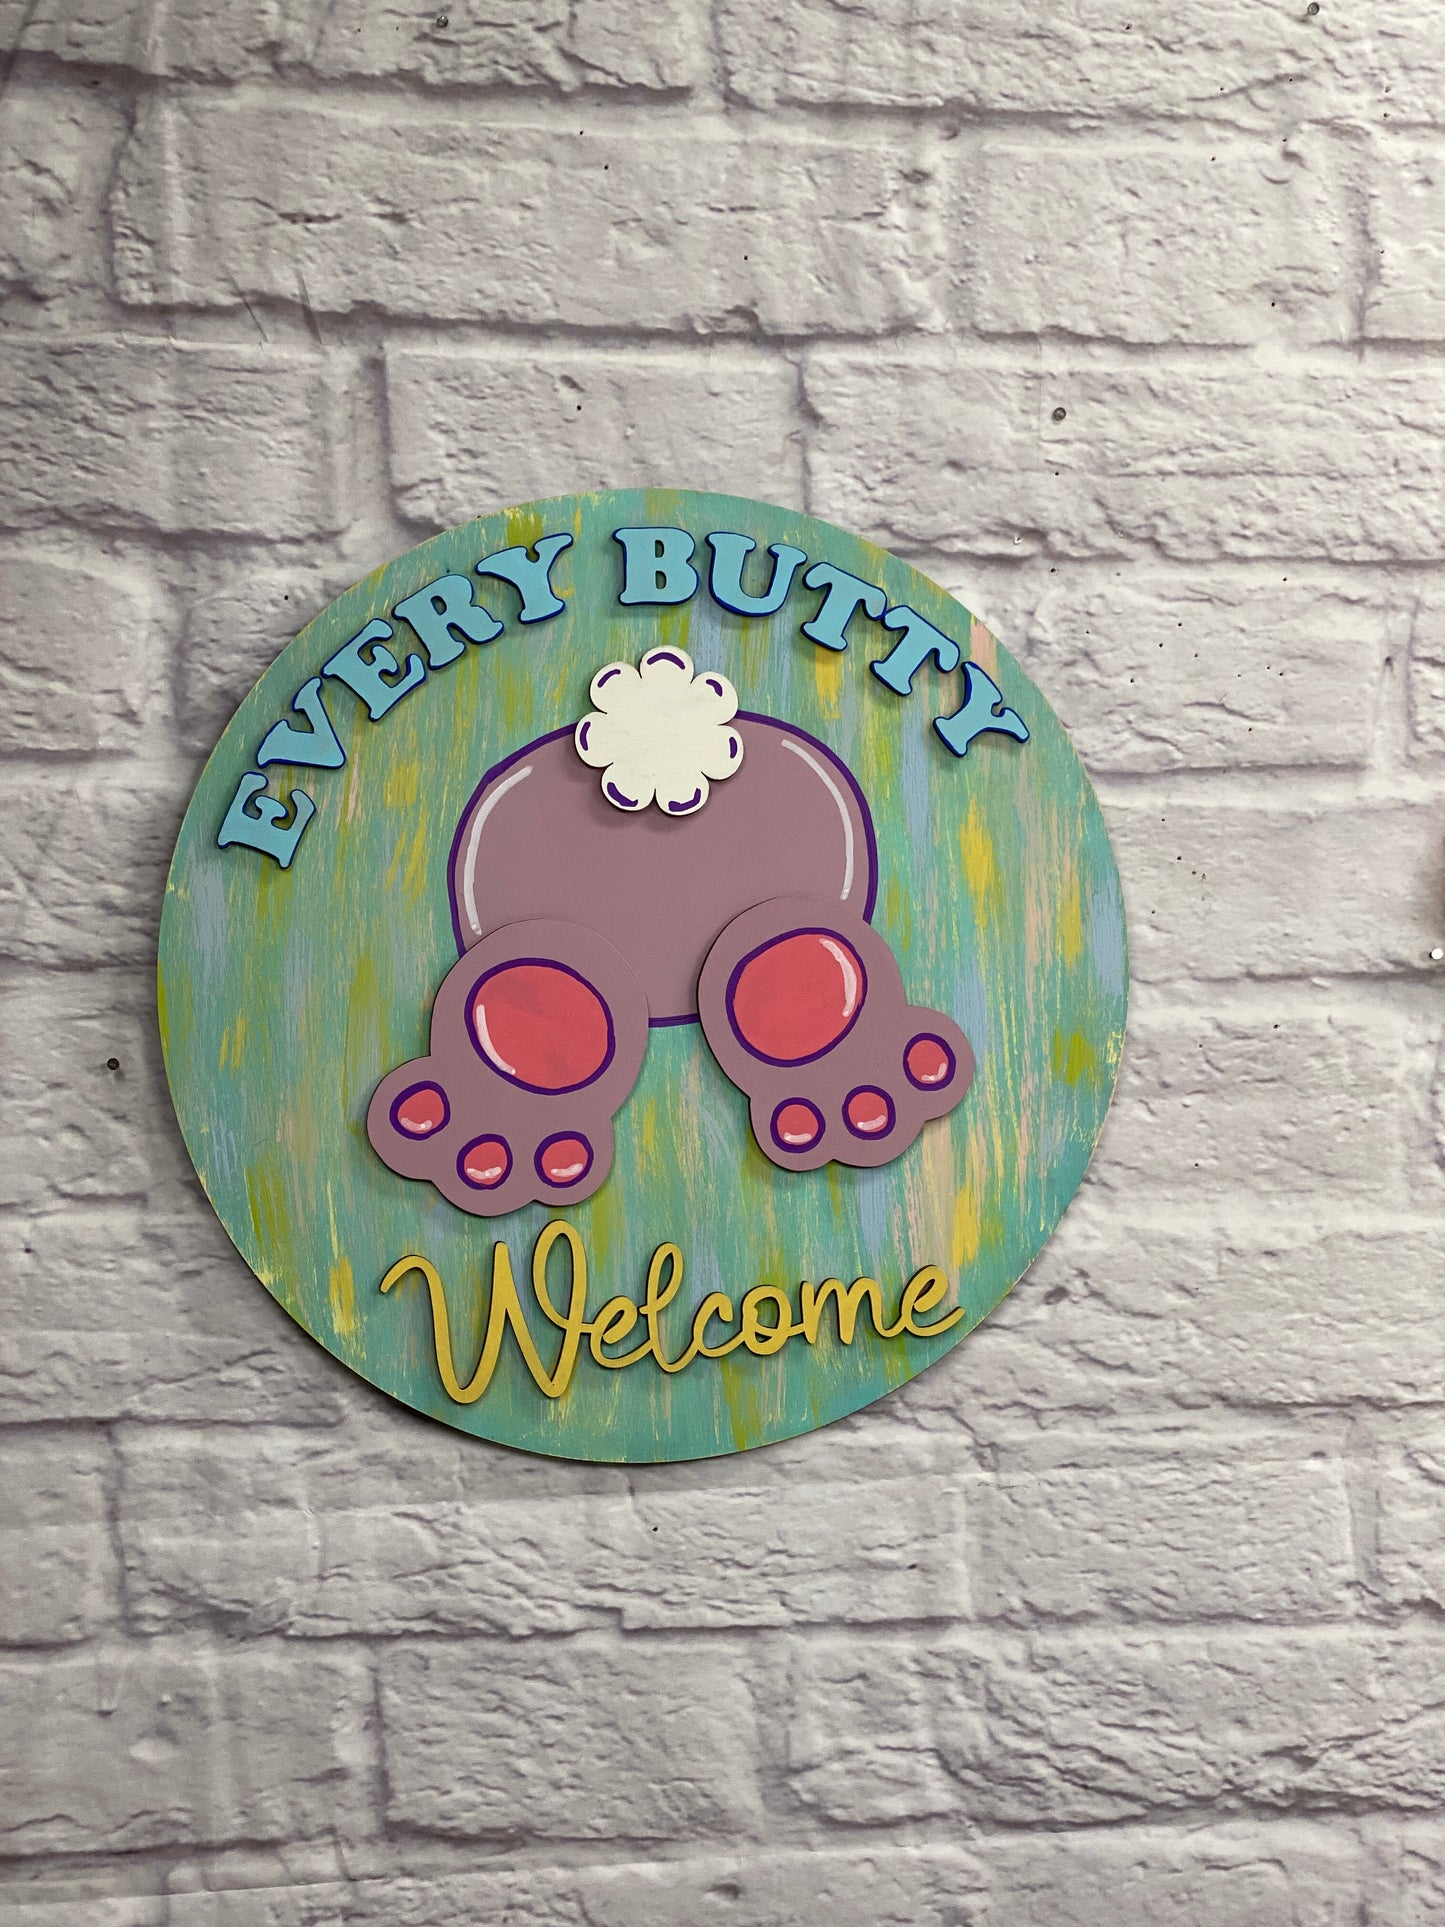 Every Butty Welcome Bunny Bottom Door Hanger Laser Cut Blank for DIY Project